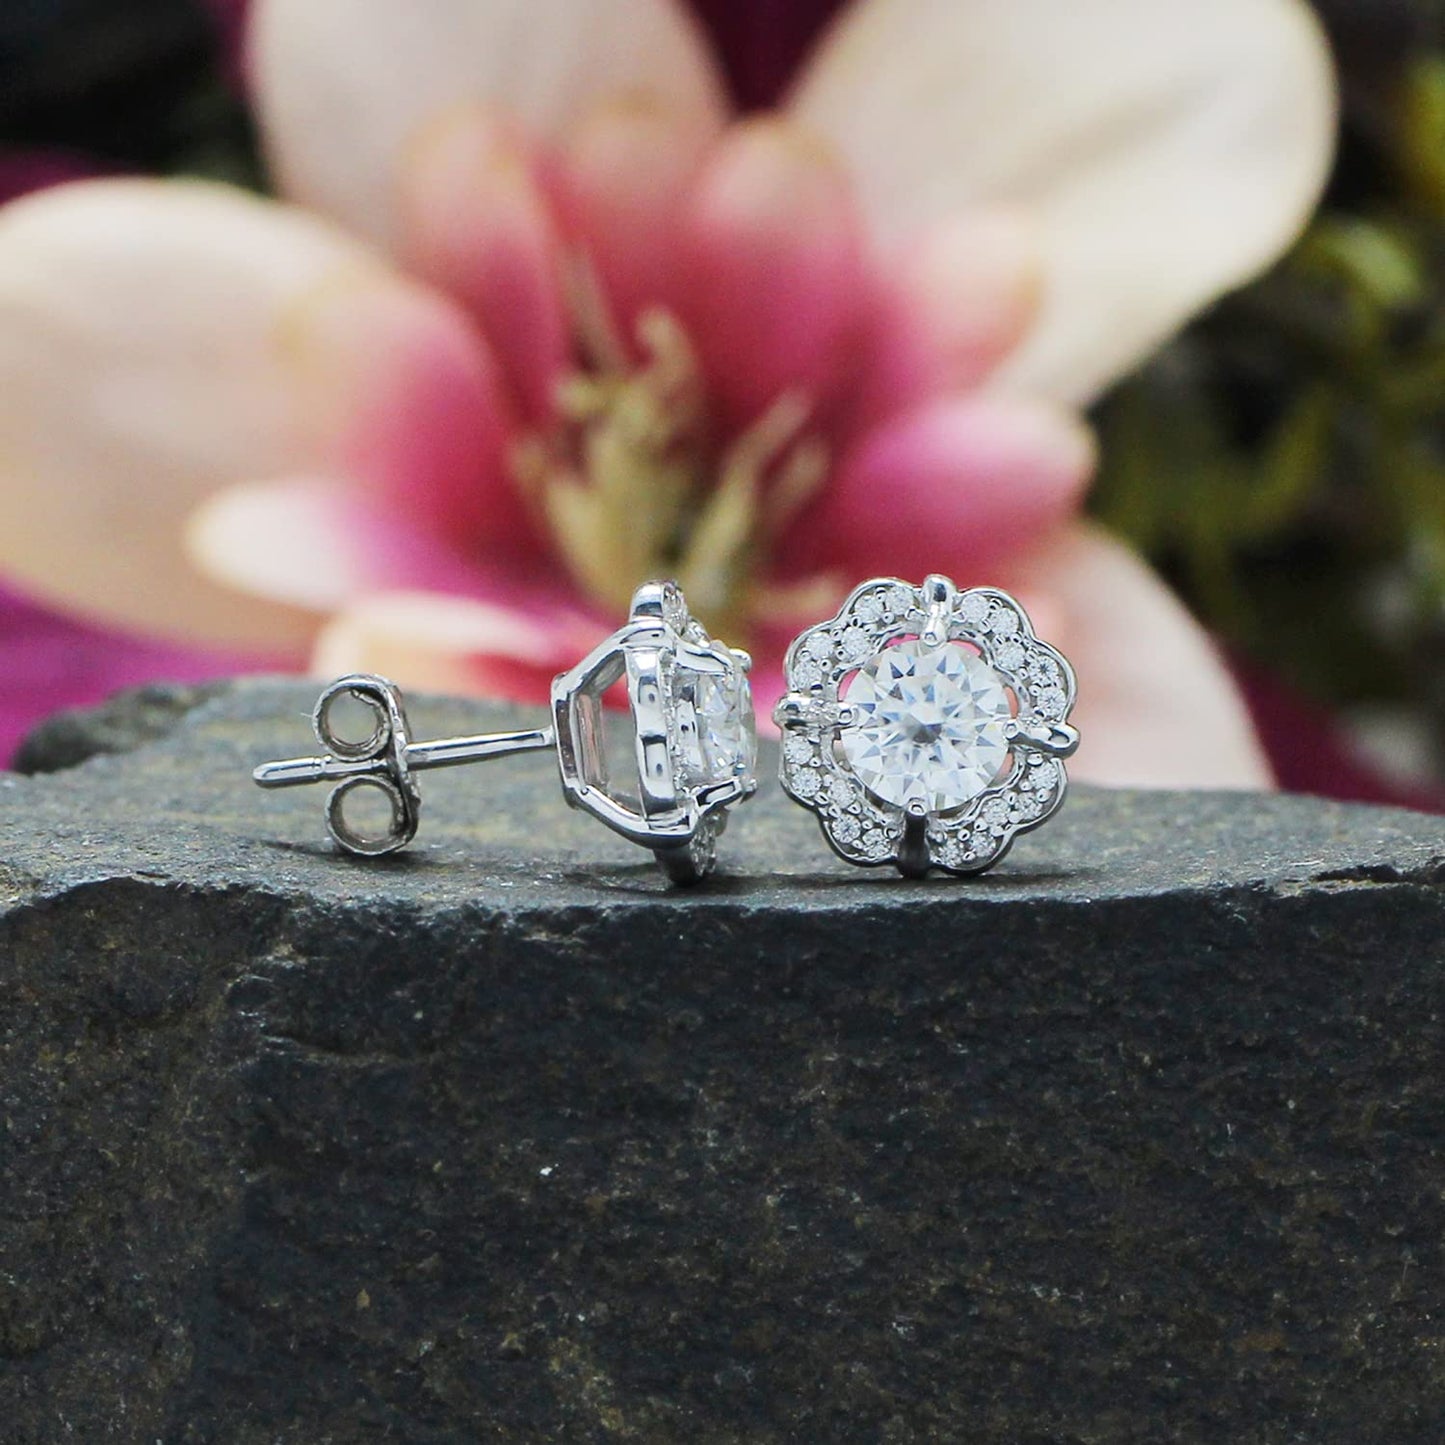 1 Carat Round Cut Lab Created Moissanite Diamond Floral Halo Stud Earrings In 925 Sterling Silver Jewelry